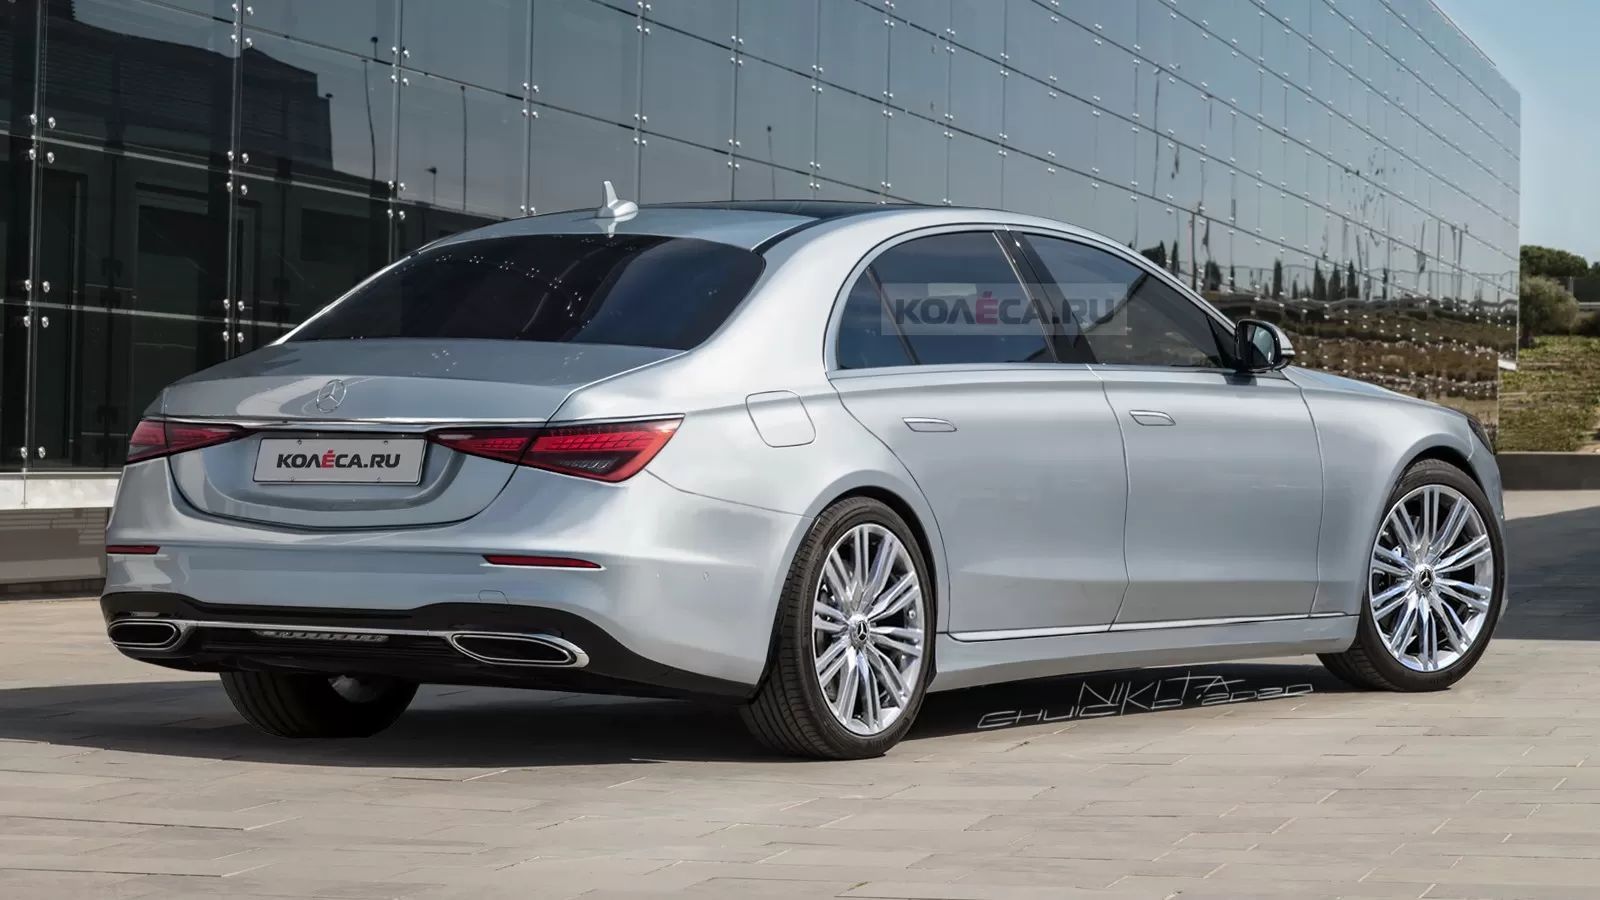 Mercedes Benz S Class Accurately .carscoops.com